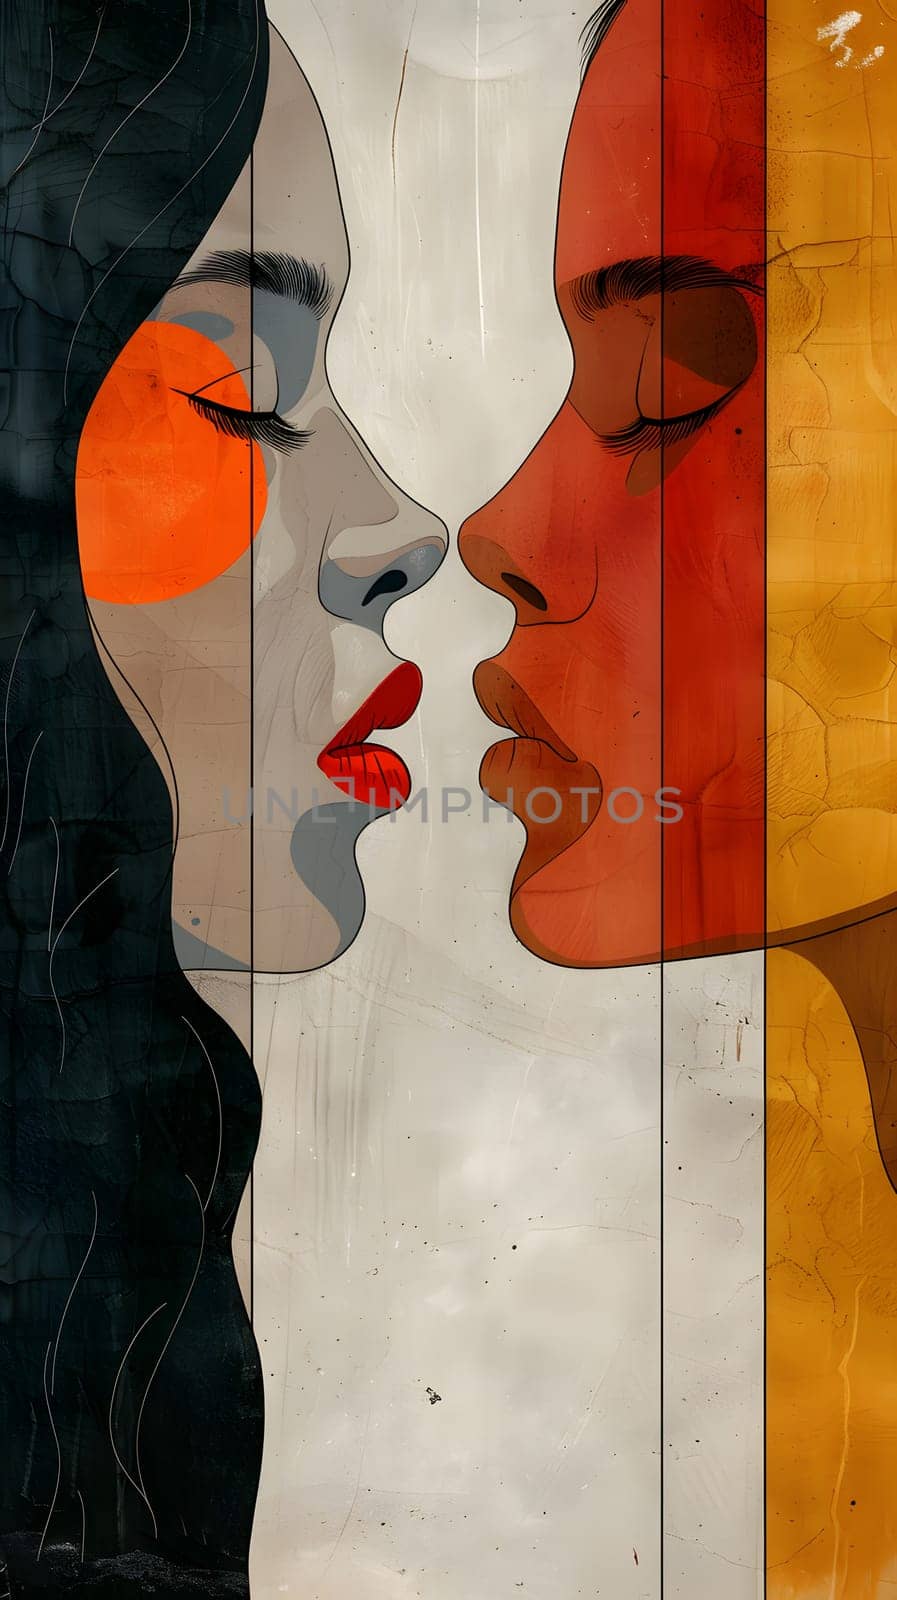 A painting of two women kissing, showing human body gestures and emotions by Nadtochiy